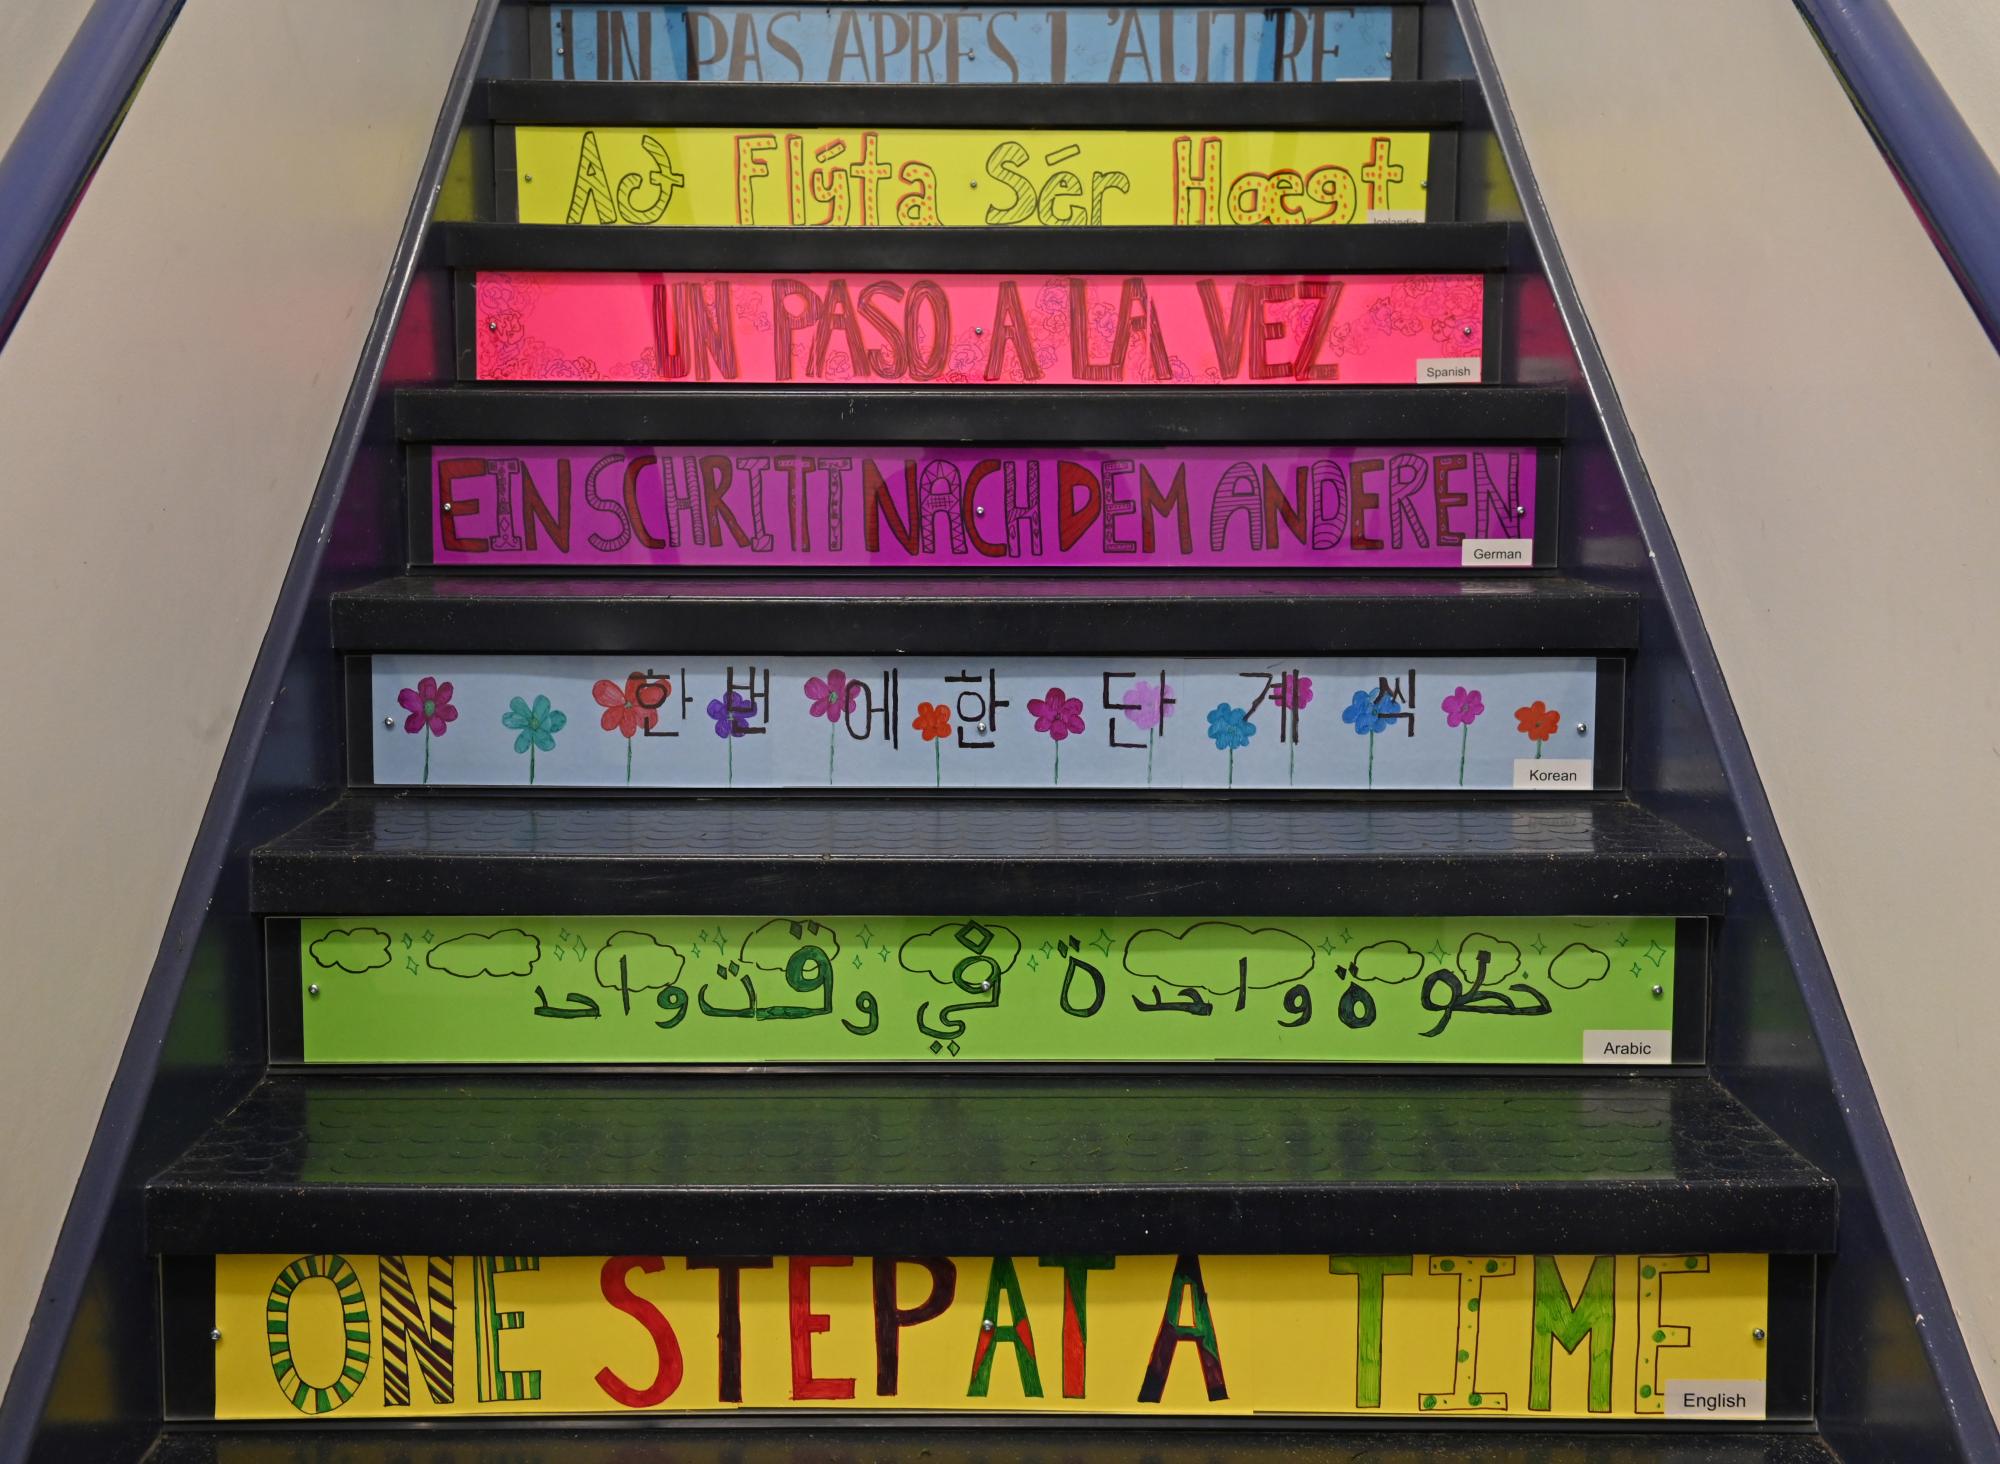 Colourful messages in multiple languages adorn the front of a set of stairs at the Middle School